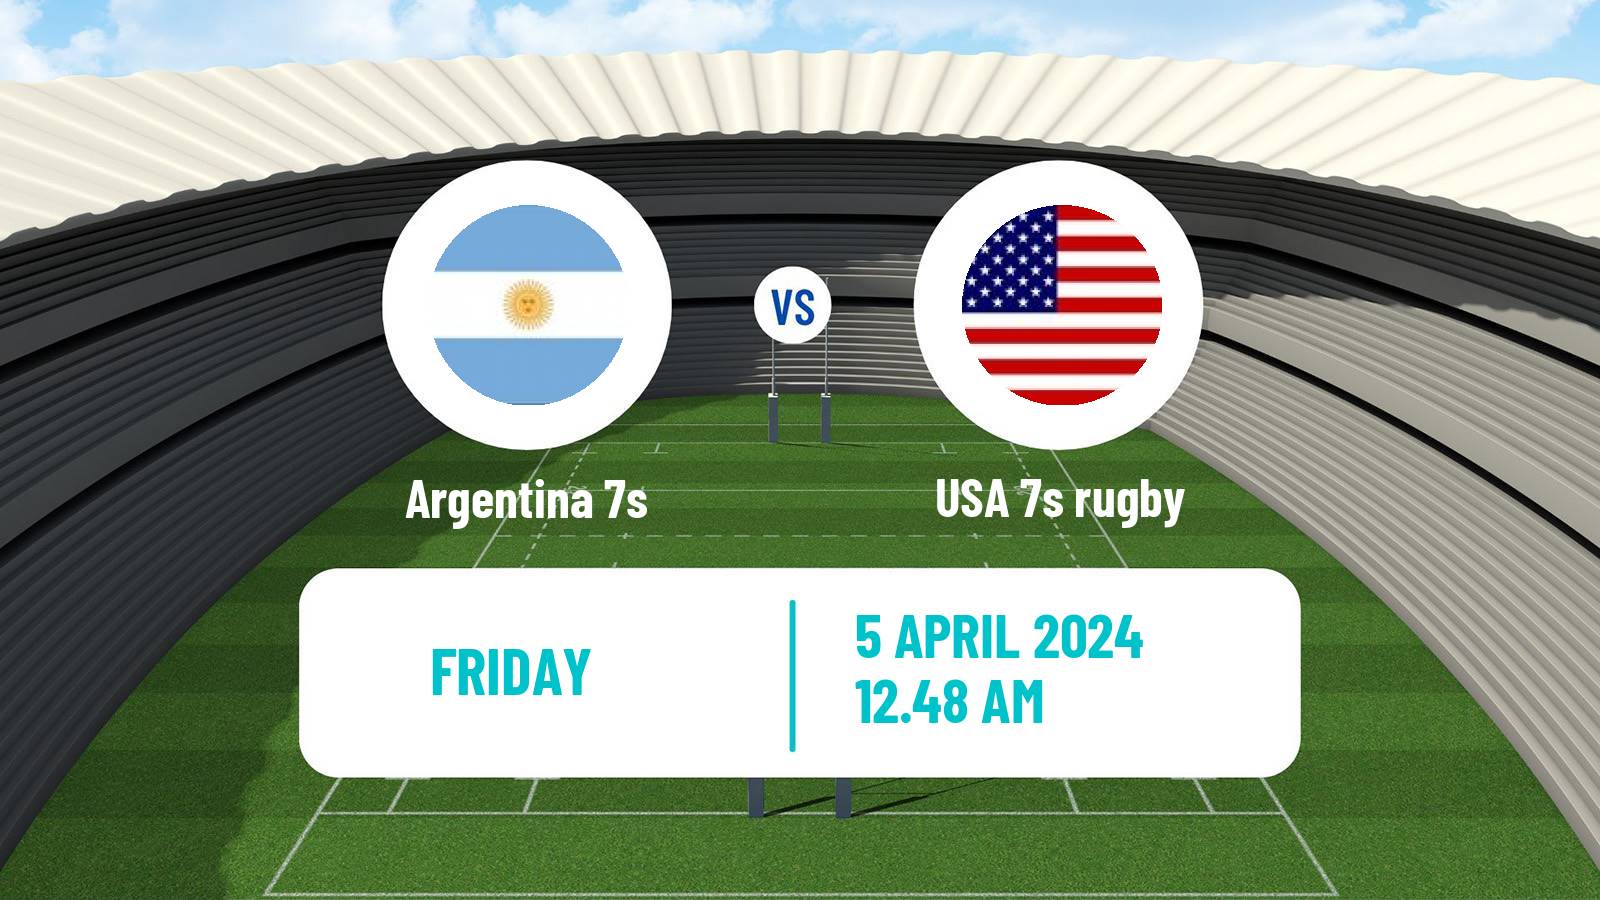 Rugby union Sevens World Series - Hong Kong Argentina 7s - USA 7s